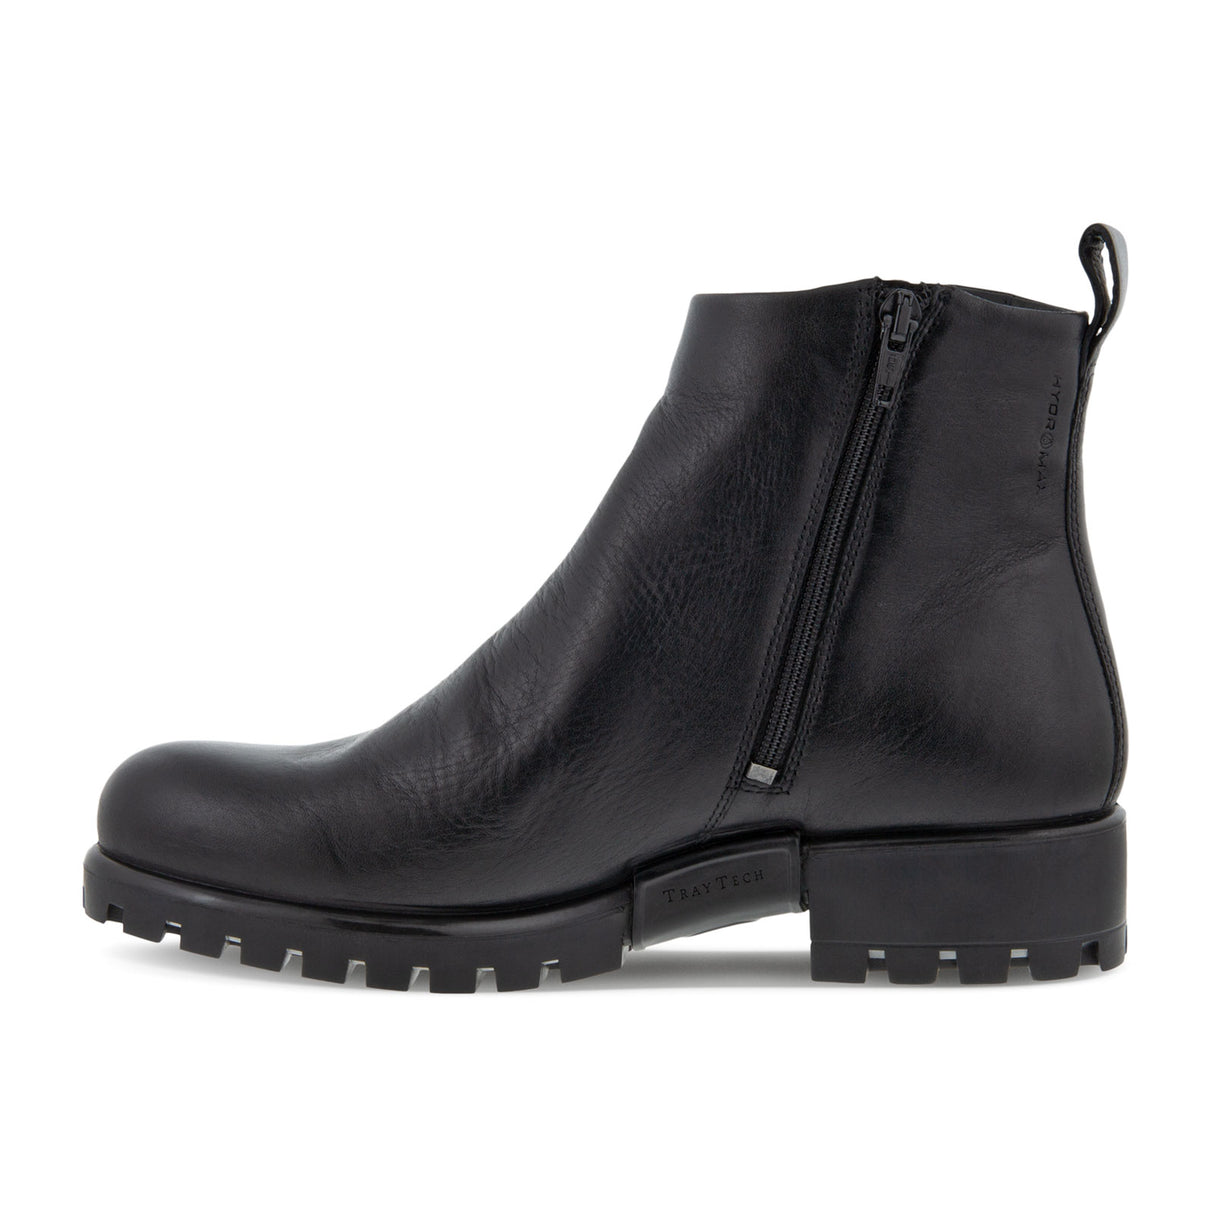 ECCO Modtray Ankle Boot (Women) - Black Boots - Fashion - Ankle Boot - The Heel Shoe Fitters